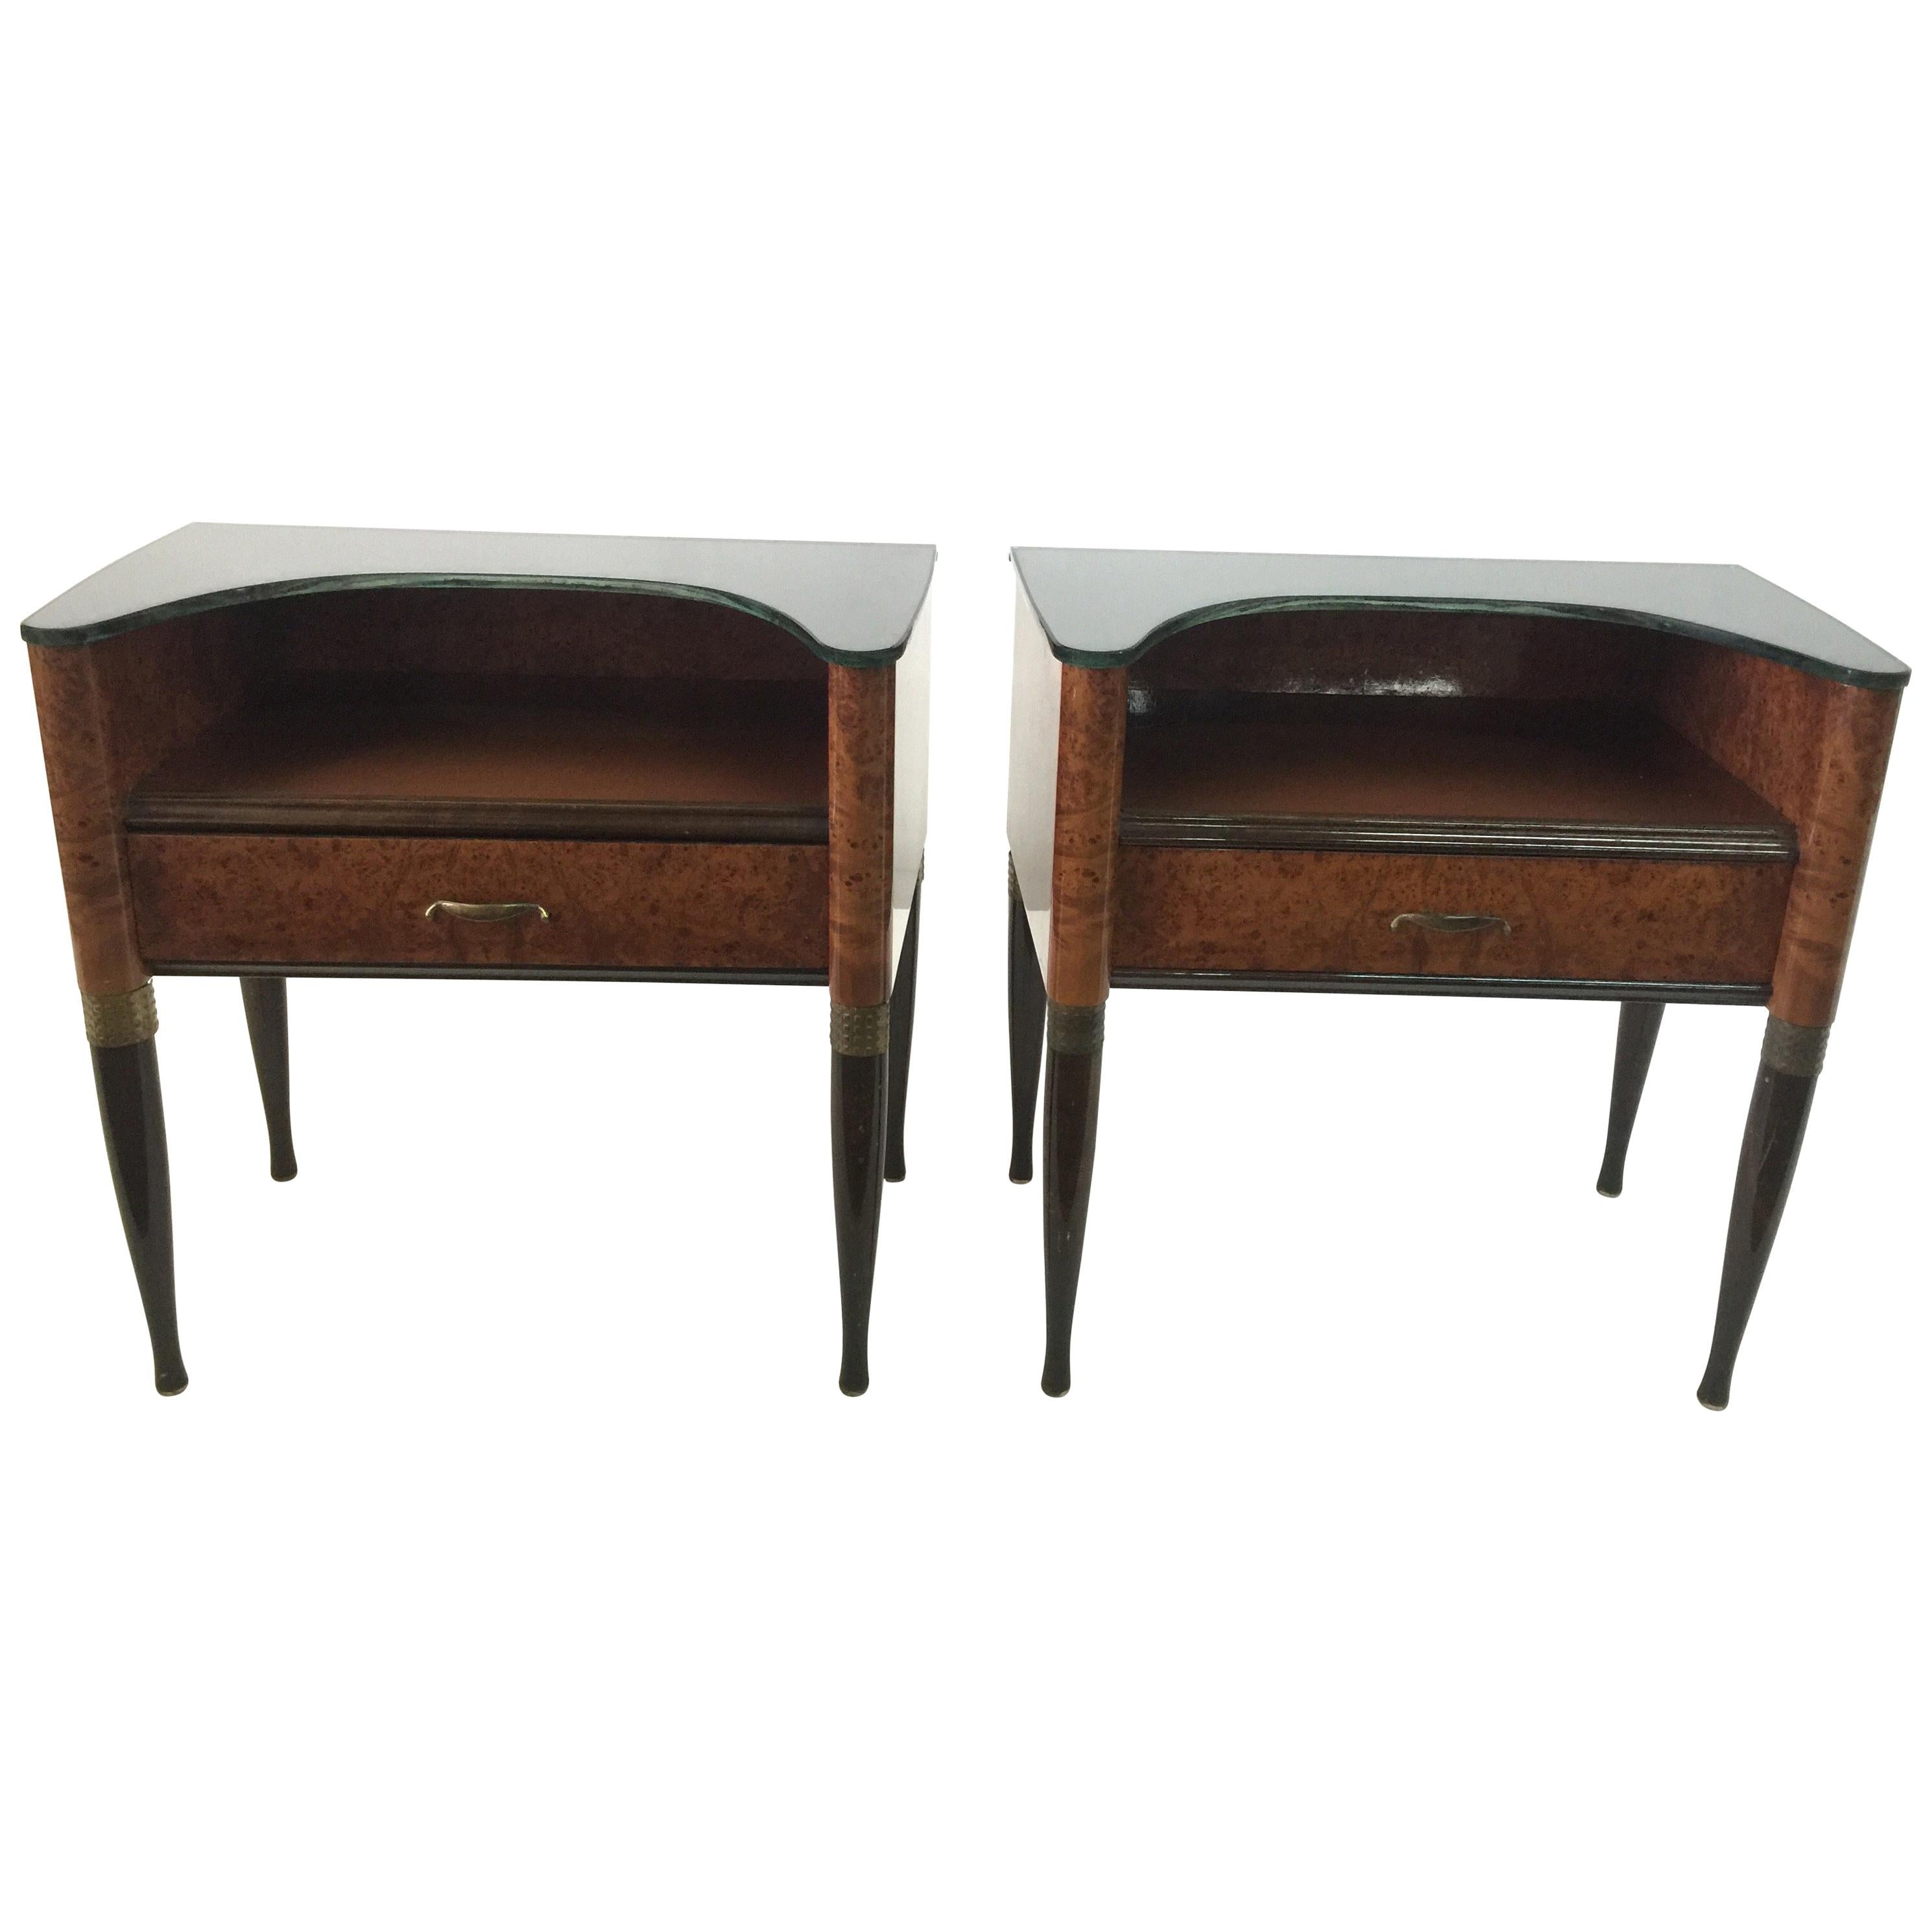 Pair of Exquisite and Rare Italian Deco Nightstands or Sidetables 